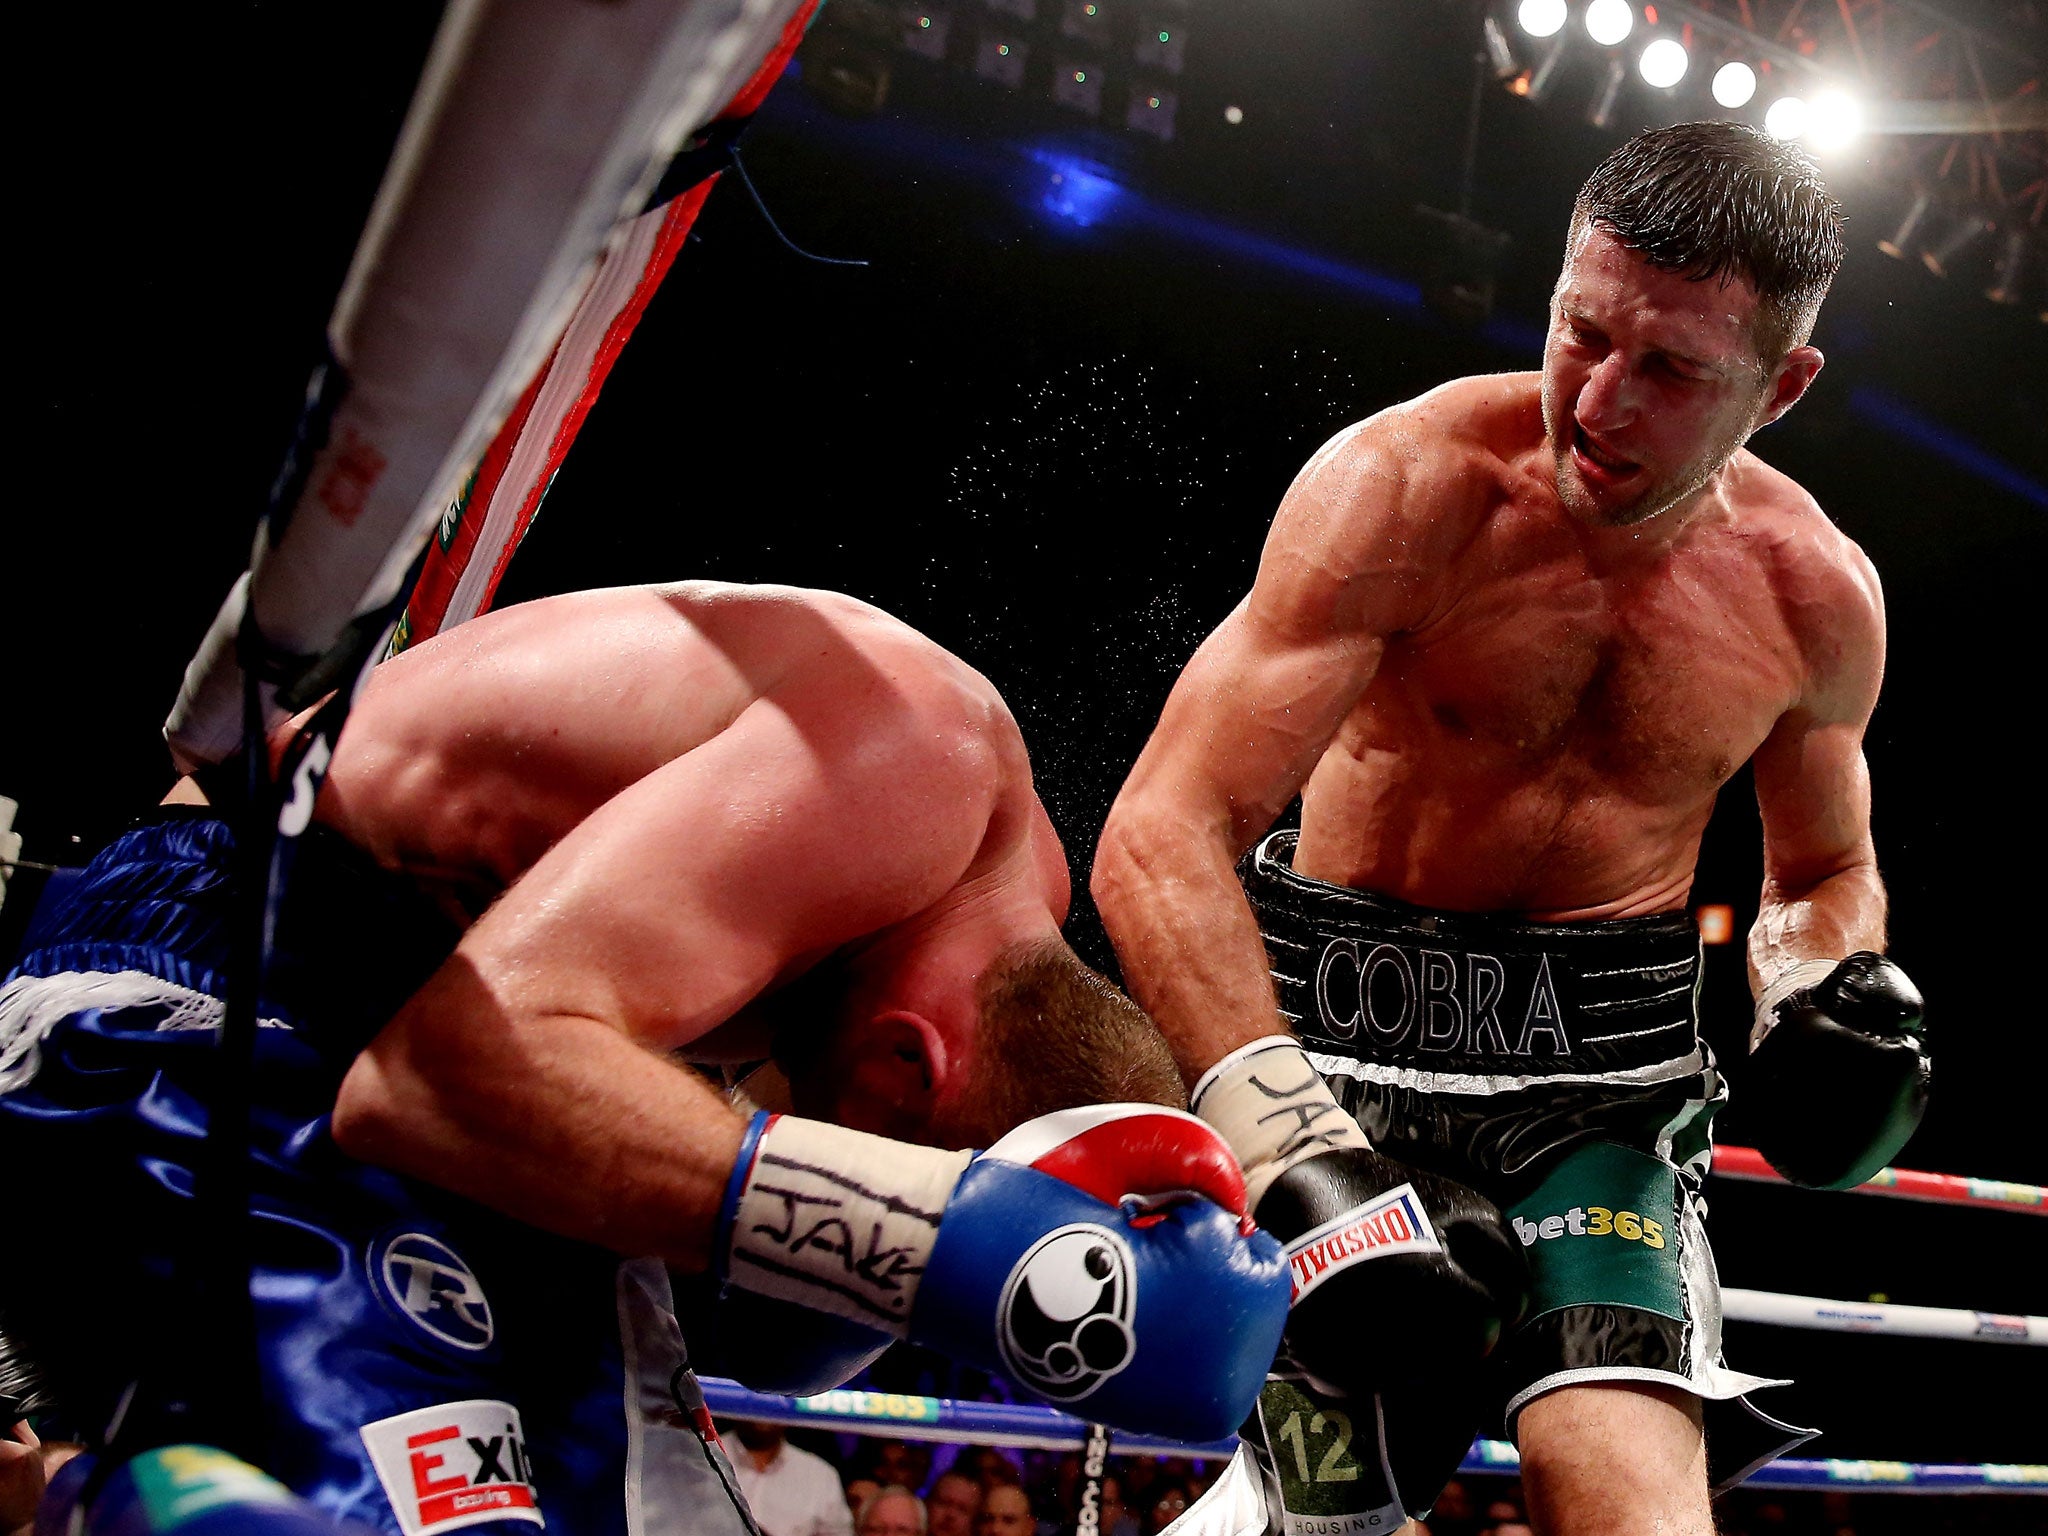 Froch unleashed a flurry of punches in the ninth that brought an end to the fight